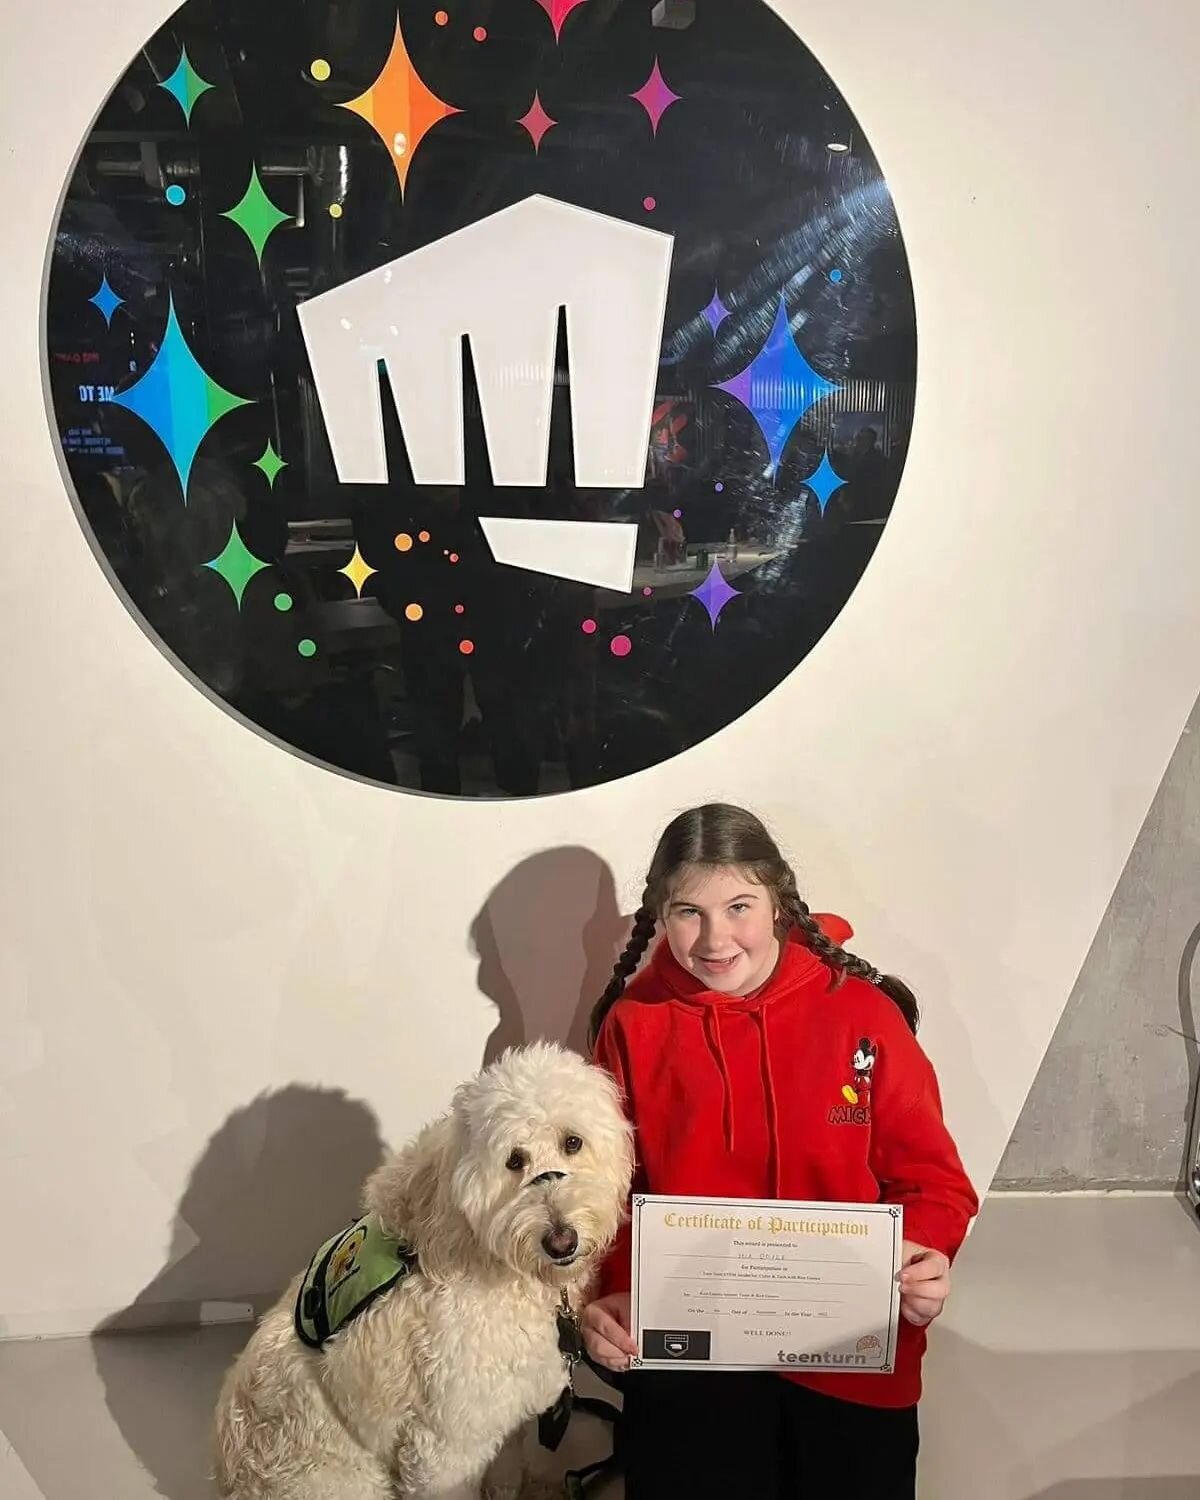 Check out MCC autism service dog Yoko and her best friend Mia at the Riot Games this week!!!

Mia's mom Tracey tells us about this amazing pair!!

&quot;Mia was so excited to go to Riot Games just like any other teenager ,but this wouldn't have been 